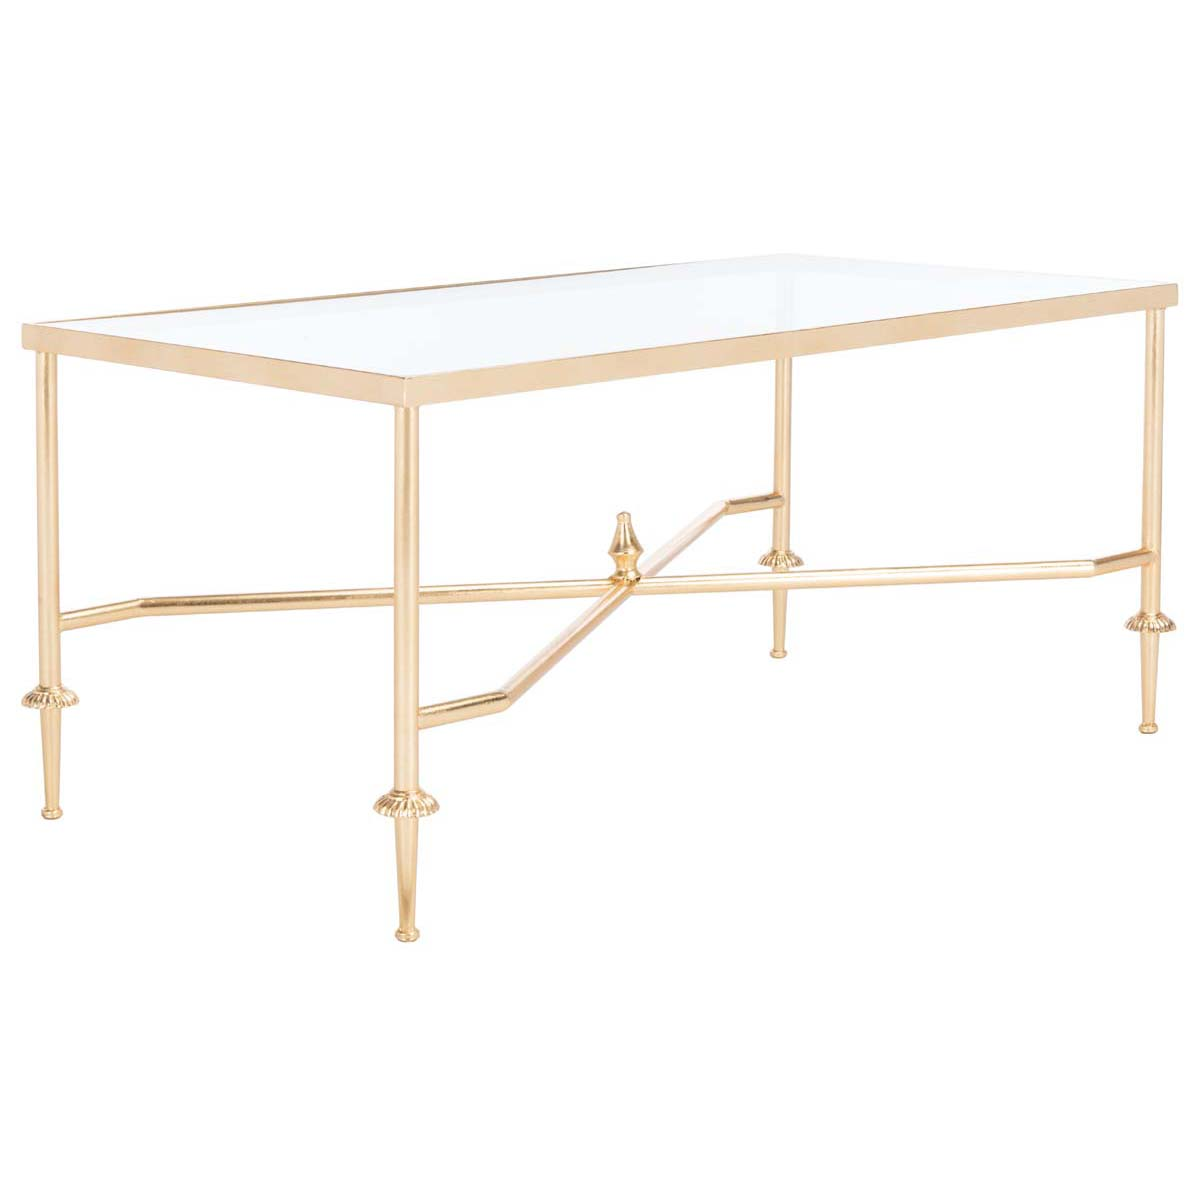 Safavieh Couture Devi Gold Leaf Coffee Table